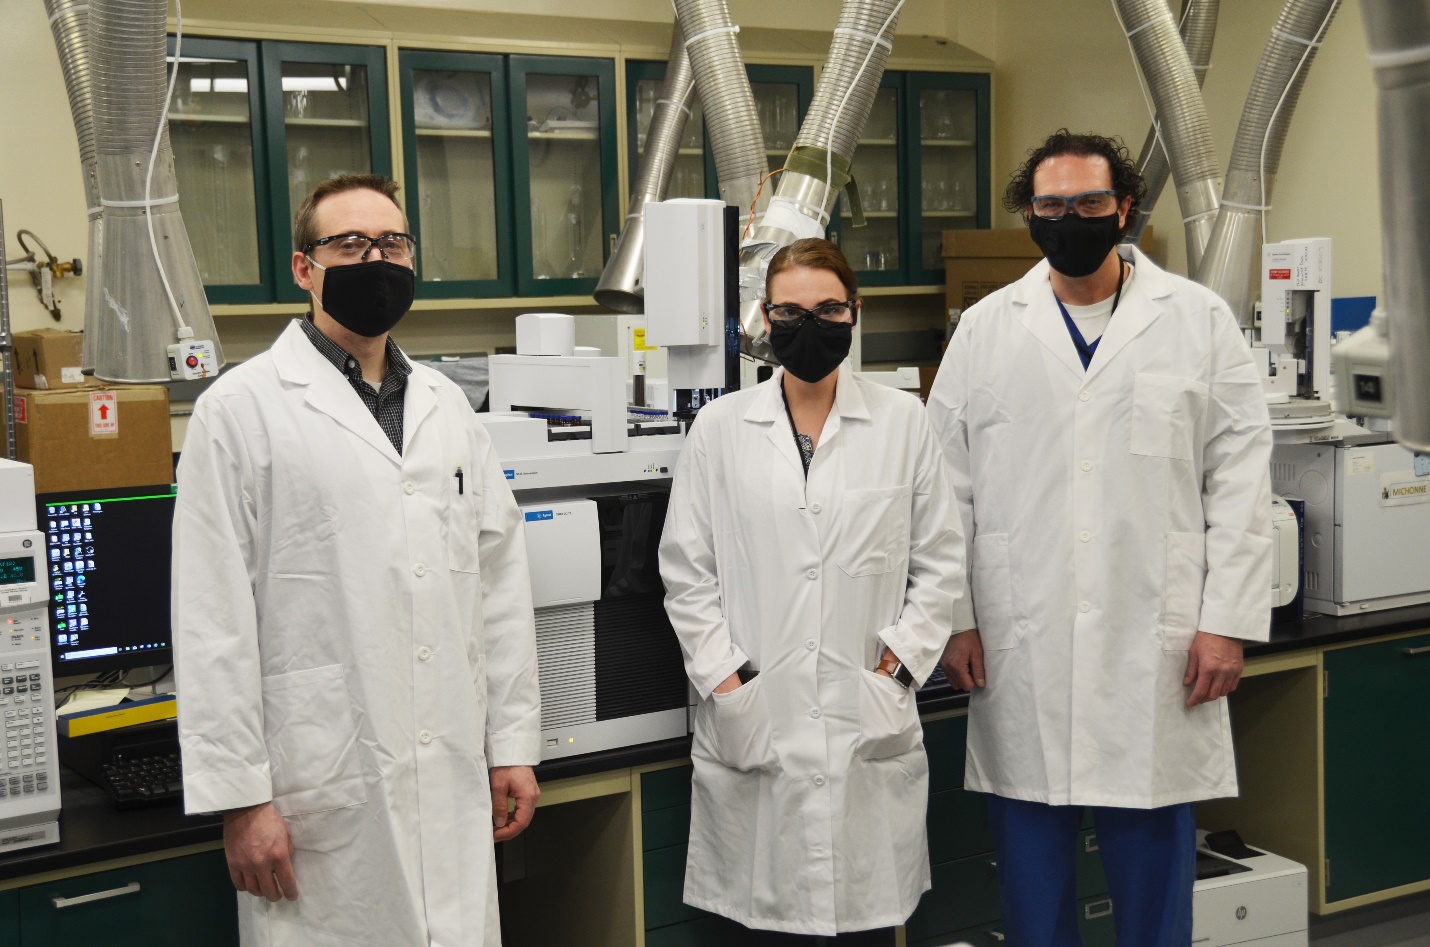 Chemists (pictured from left) Jeremy Jex, Hannah Line and Travis Losser with the Chemical Test Division’s Chemical Analytical Branch stand in front of a GC-QQQ, a highly sensitive instrument that they proved can be used to analyze chemical warfare agents. Their supervisor, Dr. Richard Phan (not pictured), provided support during the process and fellow colleagues Judy Fox, Rebecca Mine and Alexander Grimaldi contributed to the project. The group will present their findings during a virtual technical conference in early March. Photo by Becki Bryant, Dugway Public Affairs.